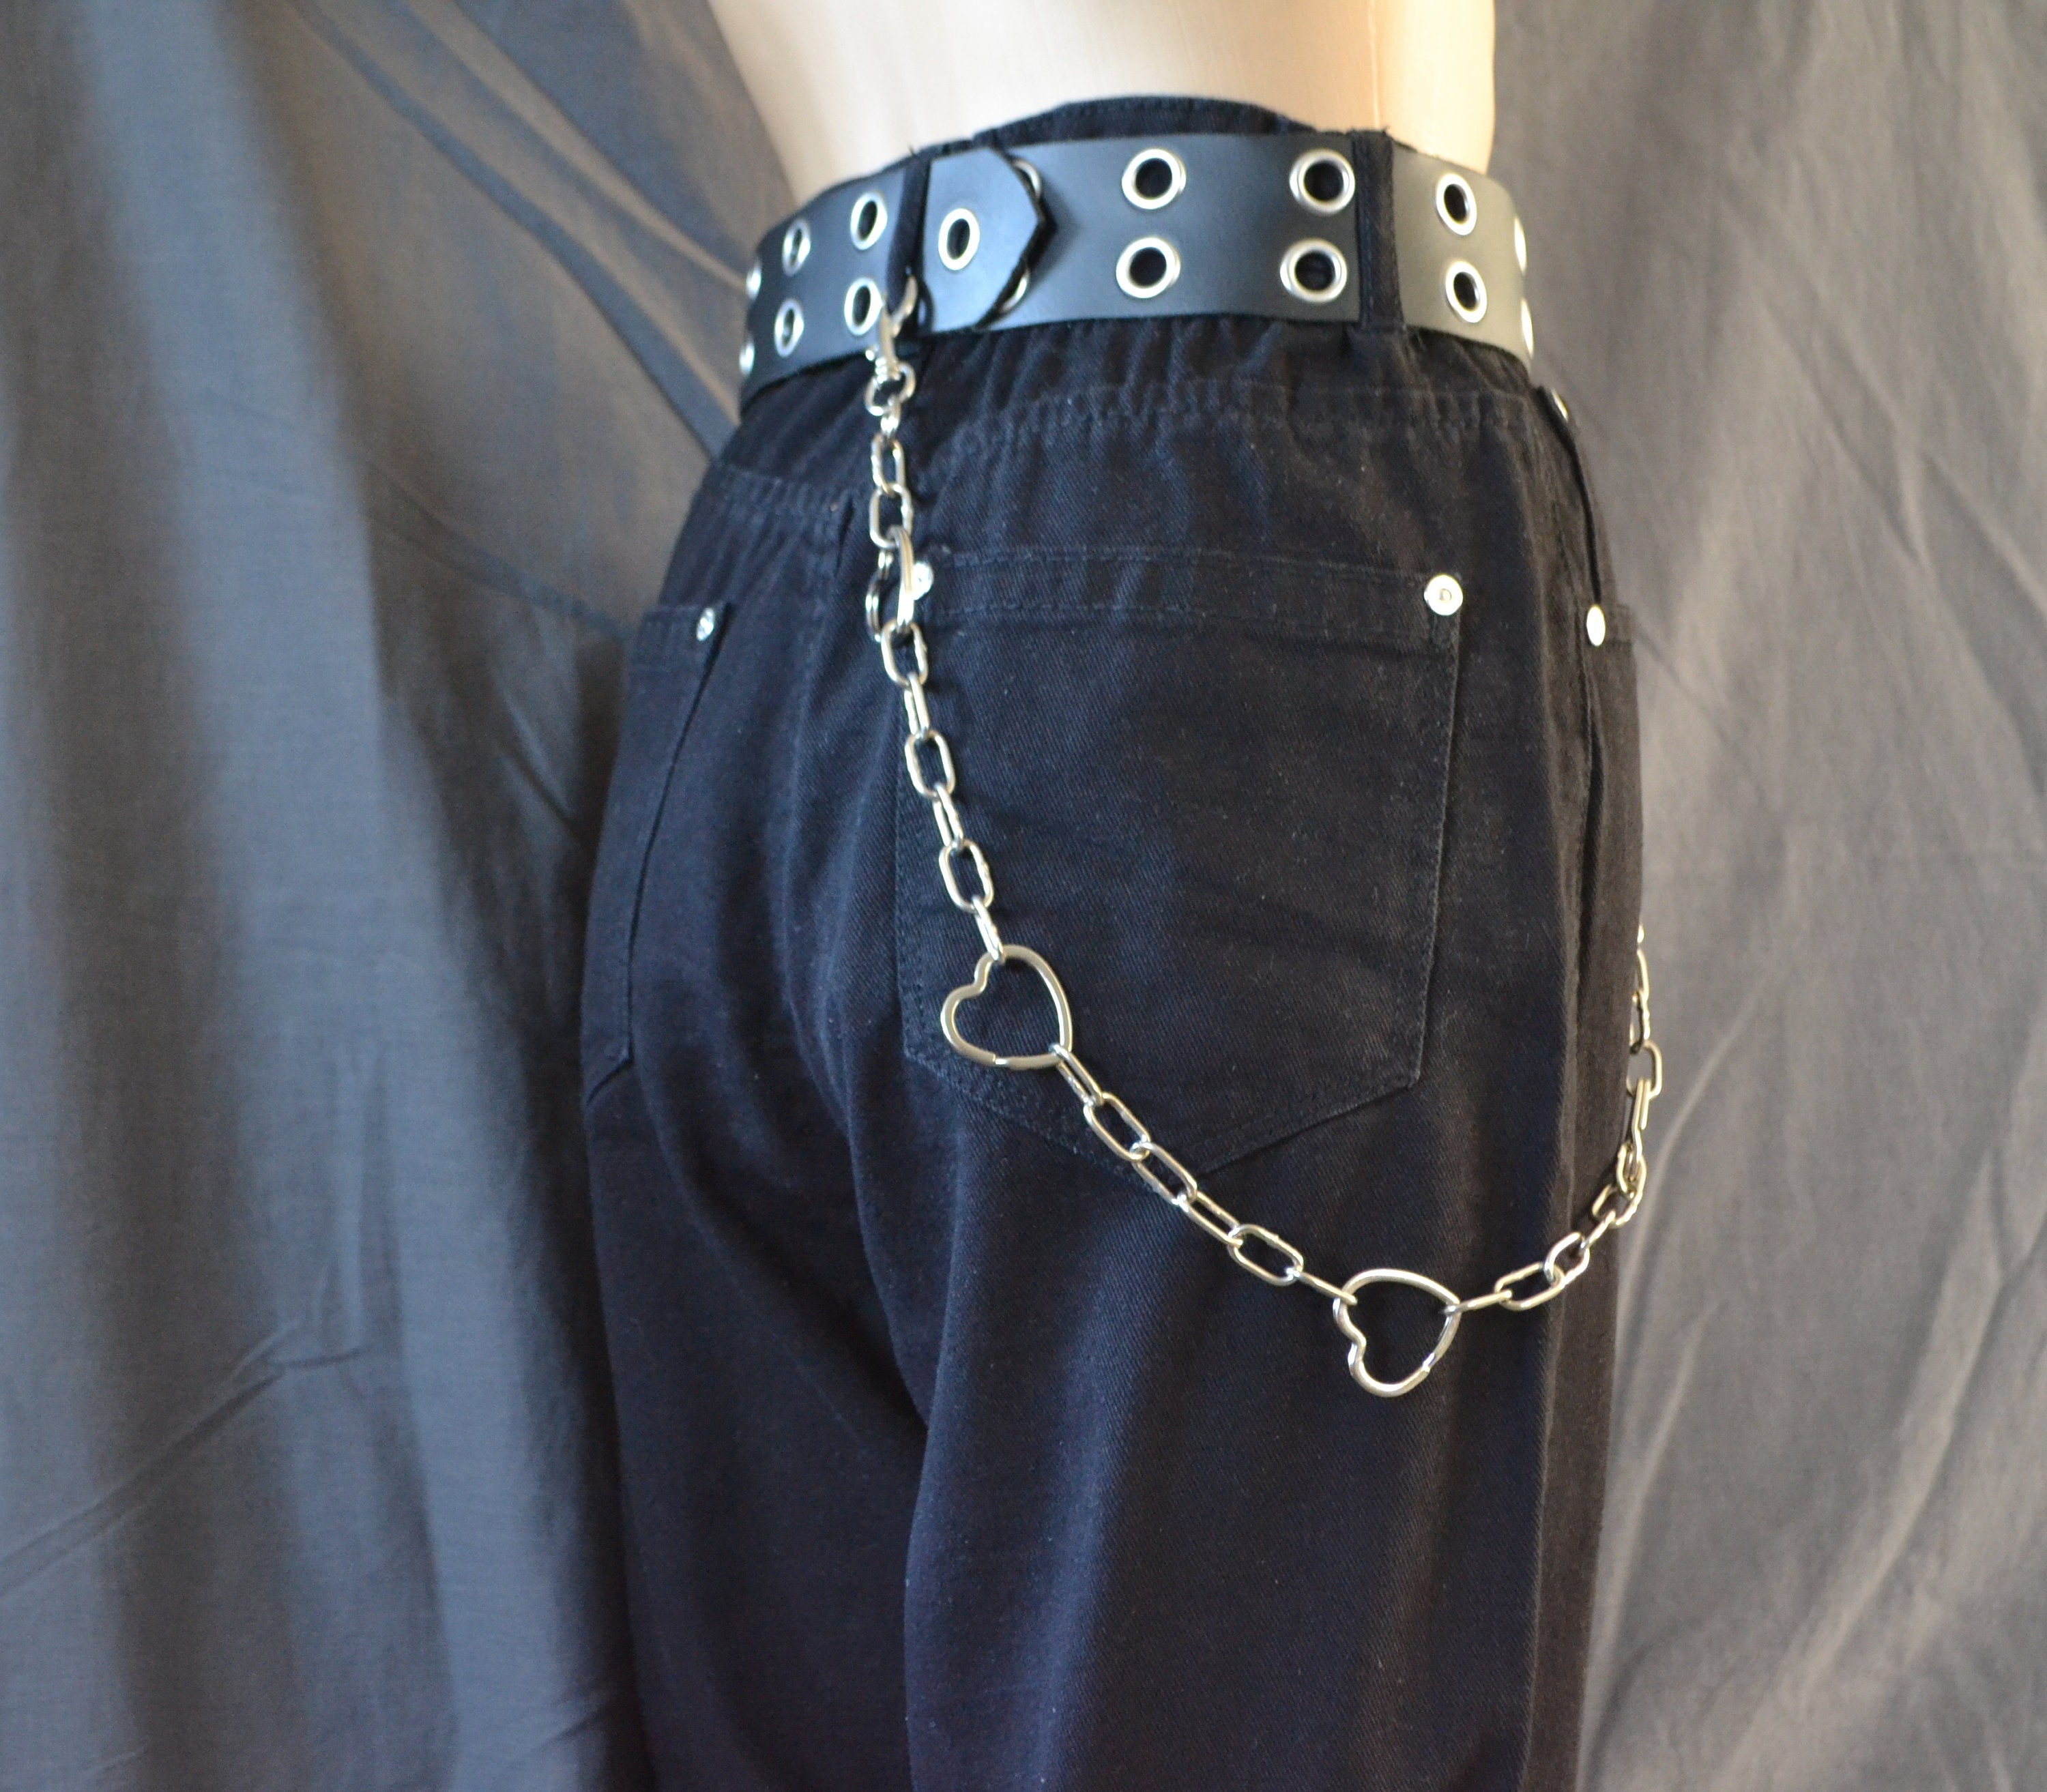 Wallet chain with leather belt loop and dog clip, Belt chain, 90's Trouser  chain, Industrial, Alternative, Grunge, Goth, Punk, Rock, Grungy